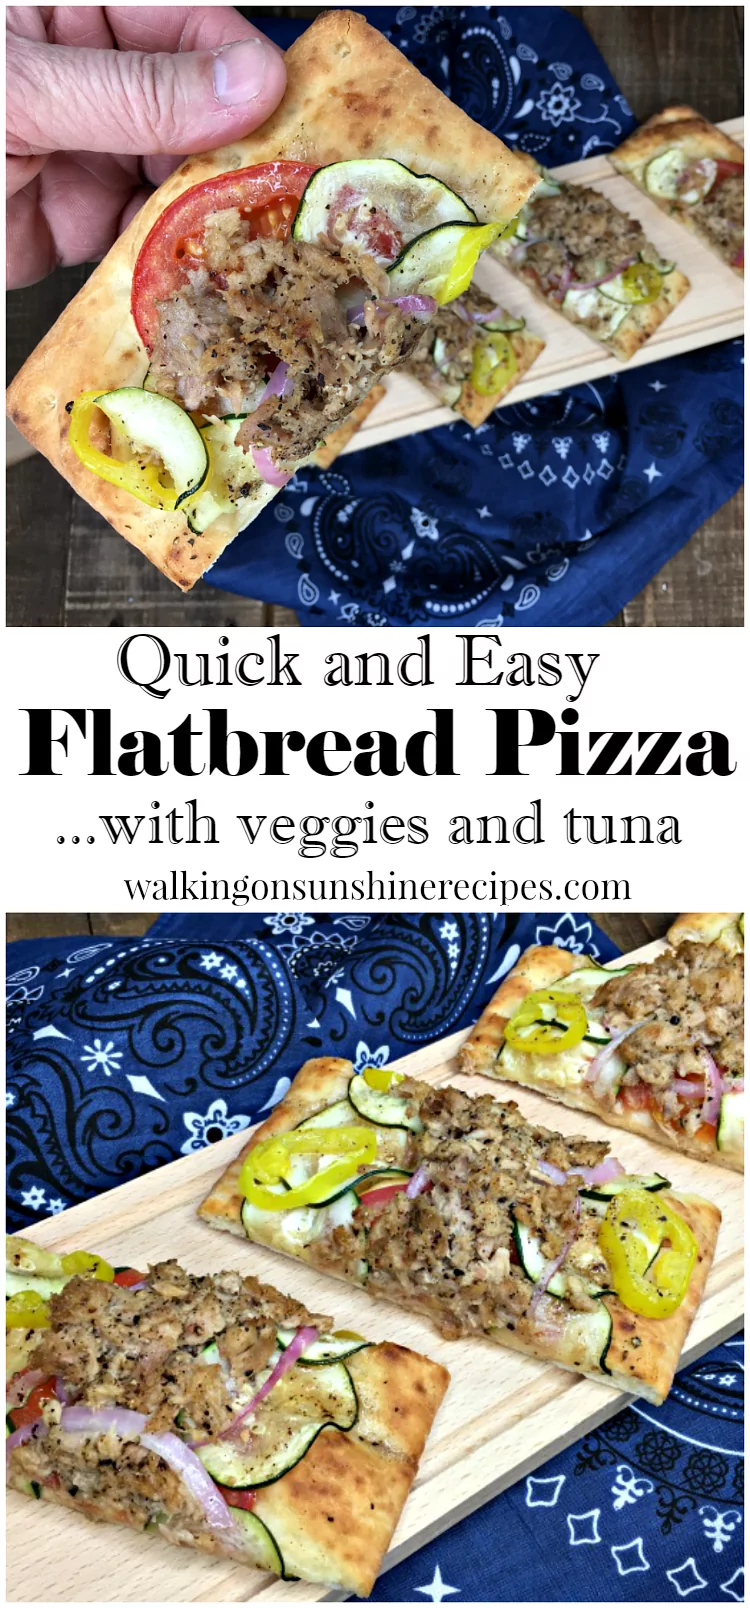 Quick and Easy Flatbread Pizza with Veggies and Tuna